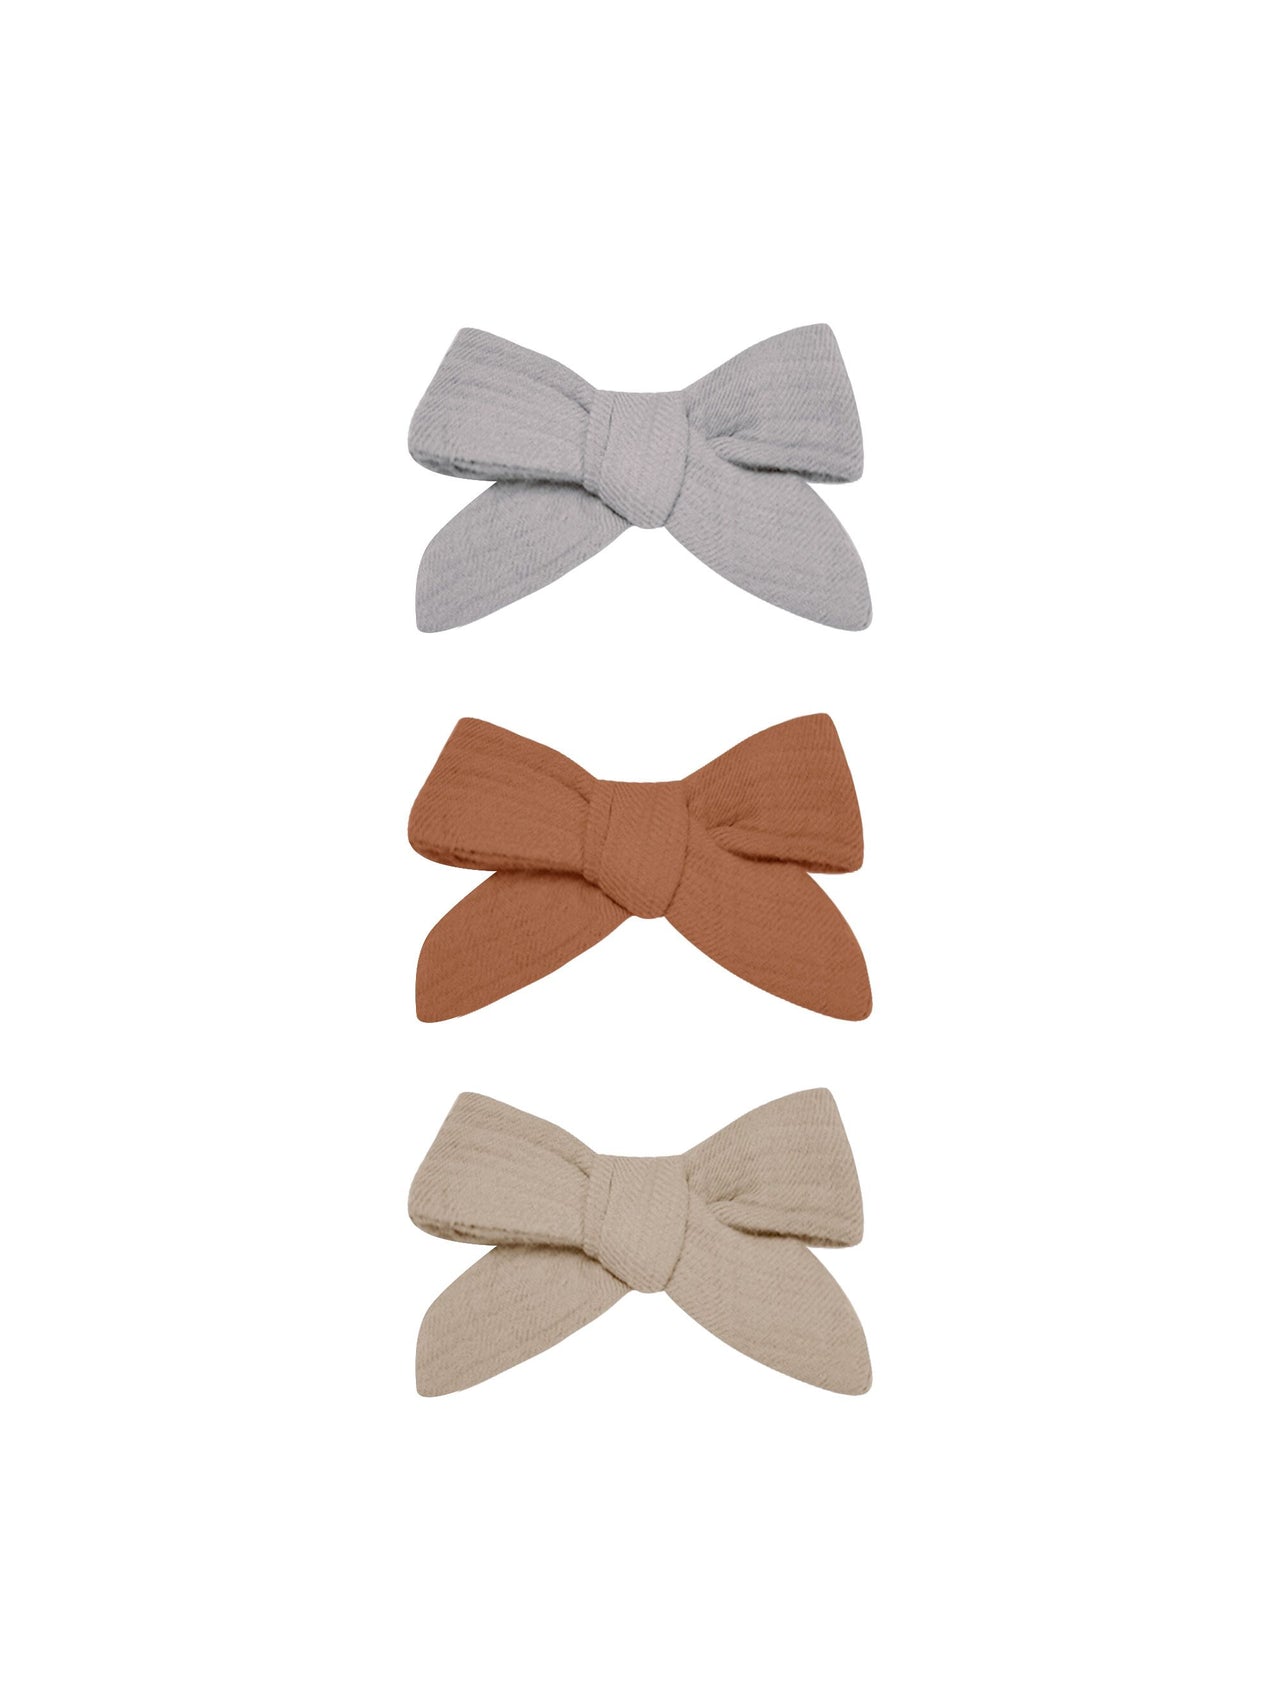 Quincy Mae Bow + Clip | Set of 3 (Periwinkle, Clay, Oat)